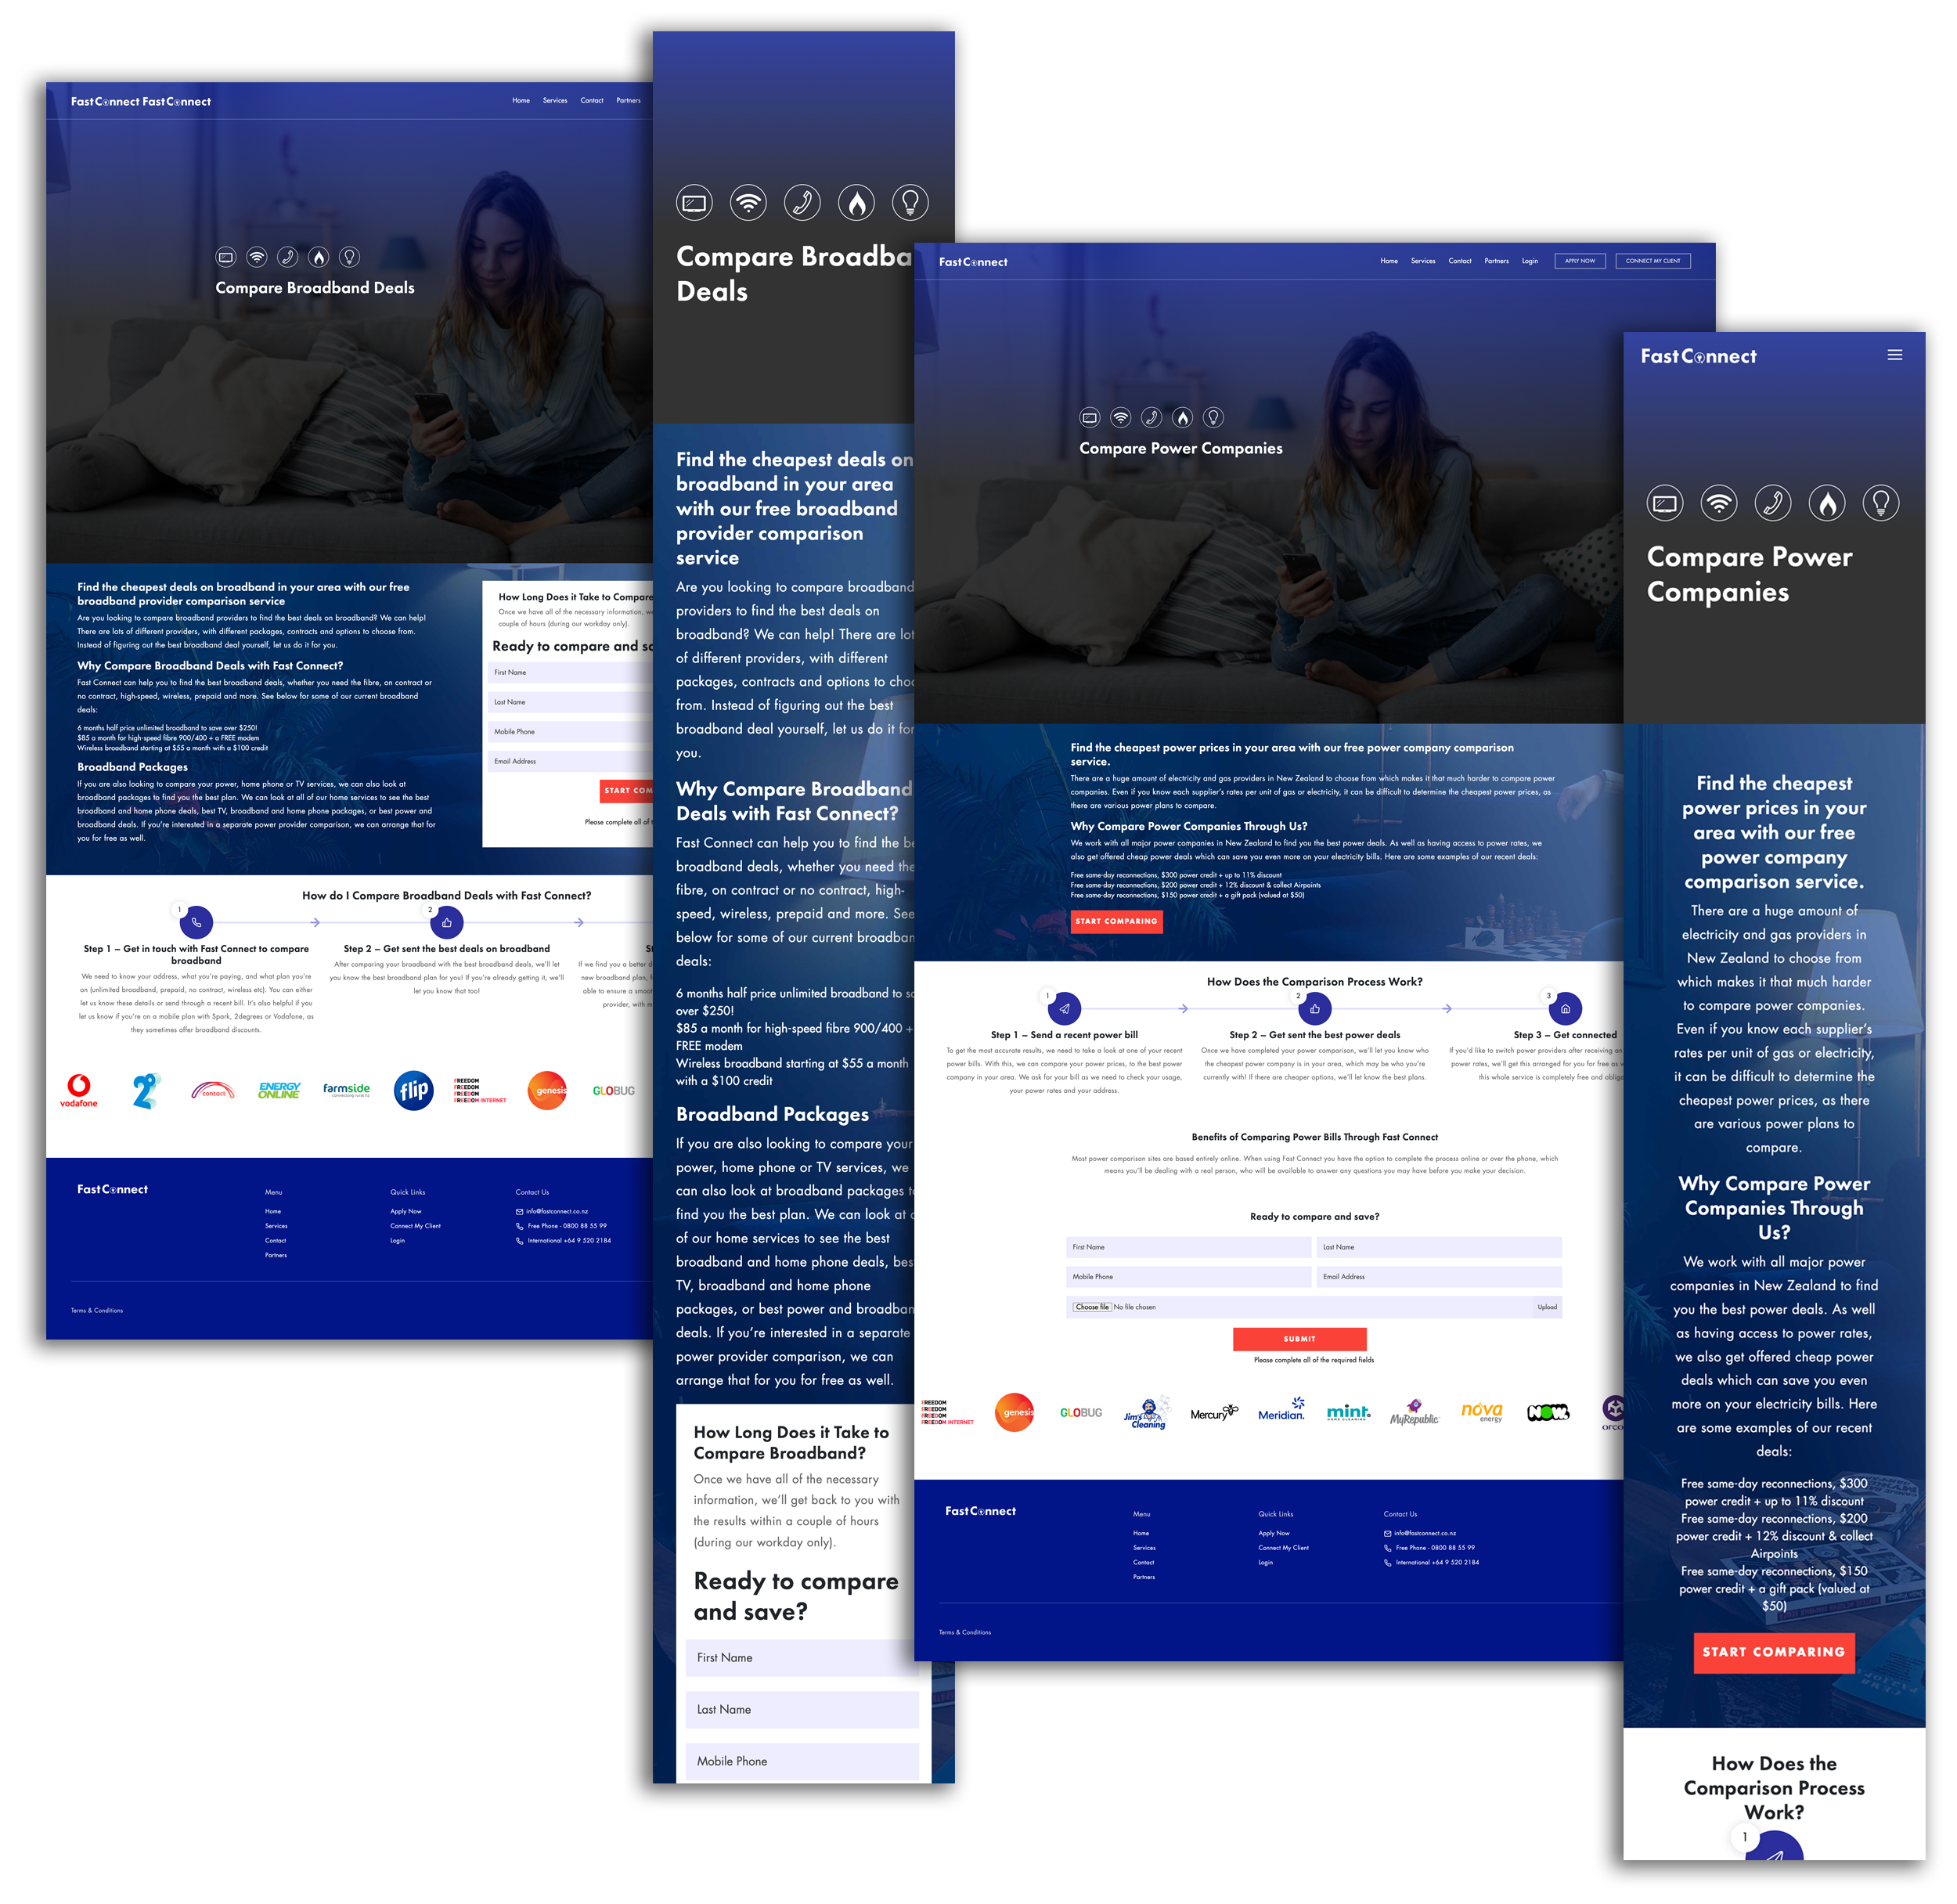 The landing pages on desktop and mobile